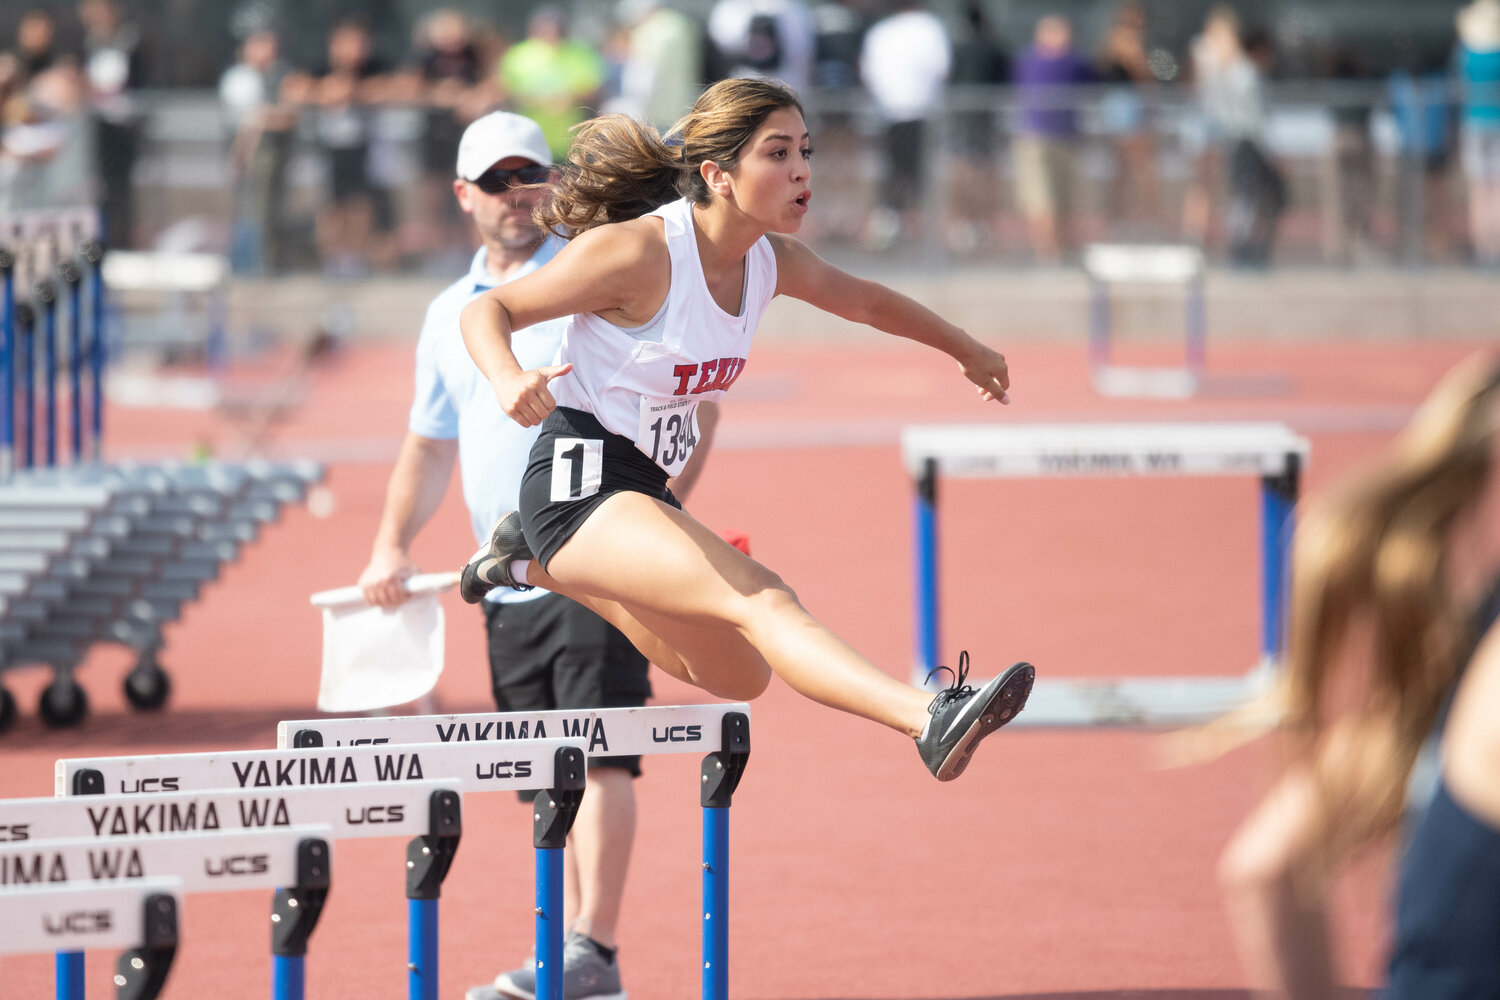 Tenino's Paisely Garcia gets into the homestretch in the 300-meter hurdles at the 1A state championships at Zaepfel Stadium in Yakima on May 25.